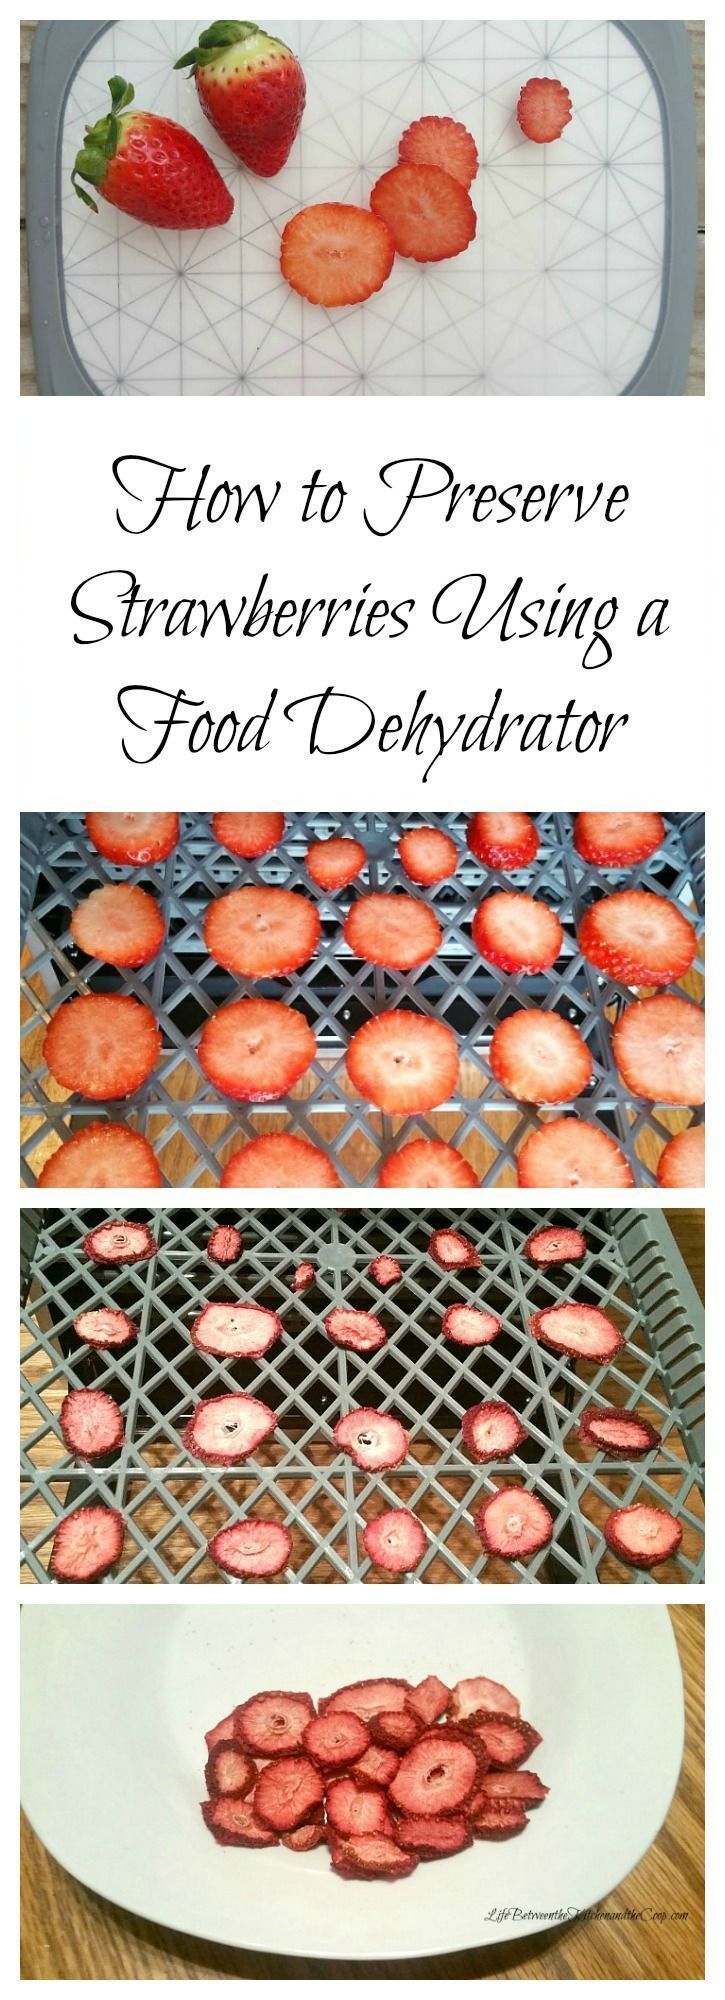 How to Preserve Strawberries Using a Food Dehydrator - How to Preserve Strawberries Using a Food Dehydrator -   17 diy Food step by step ideas